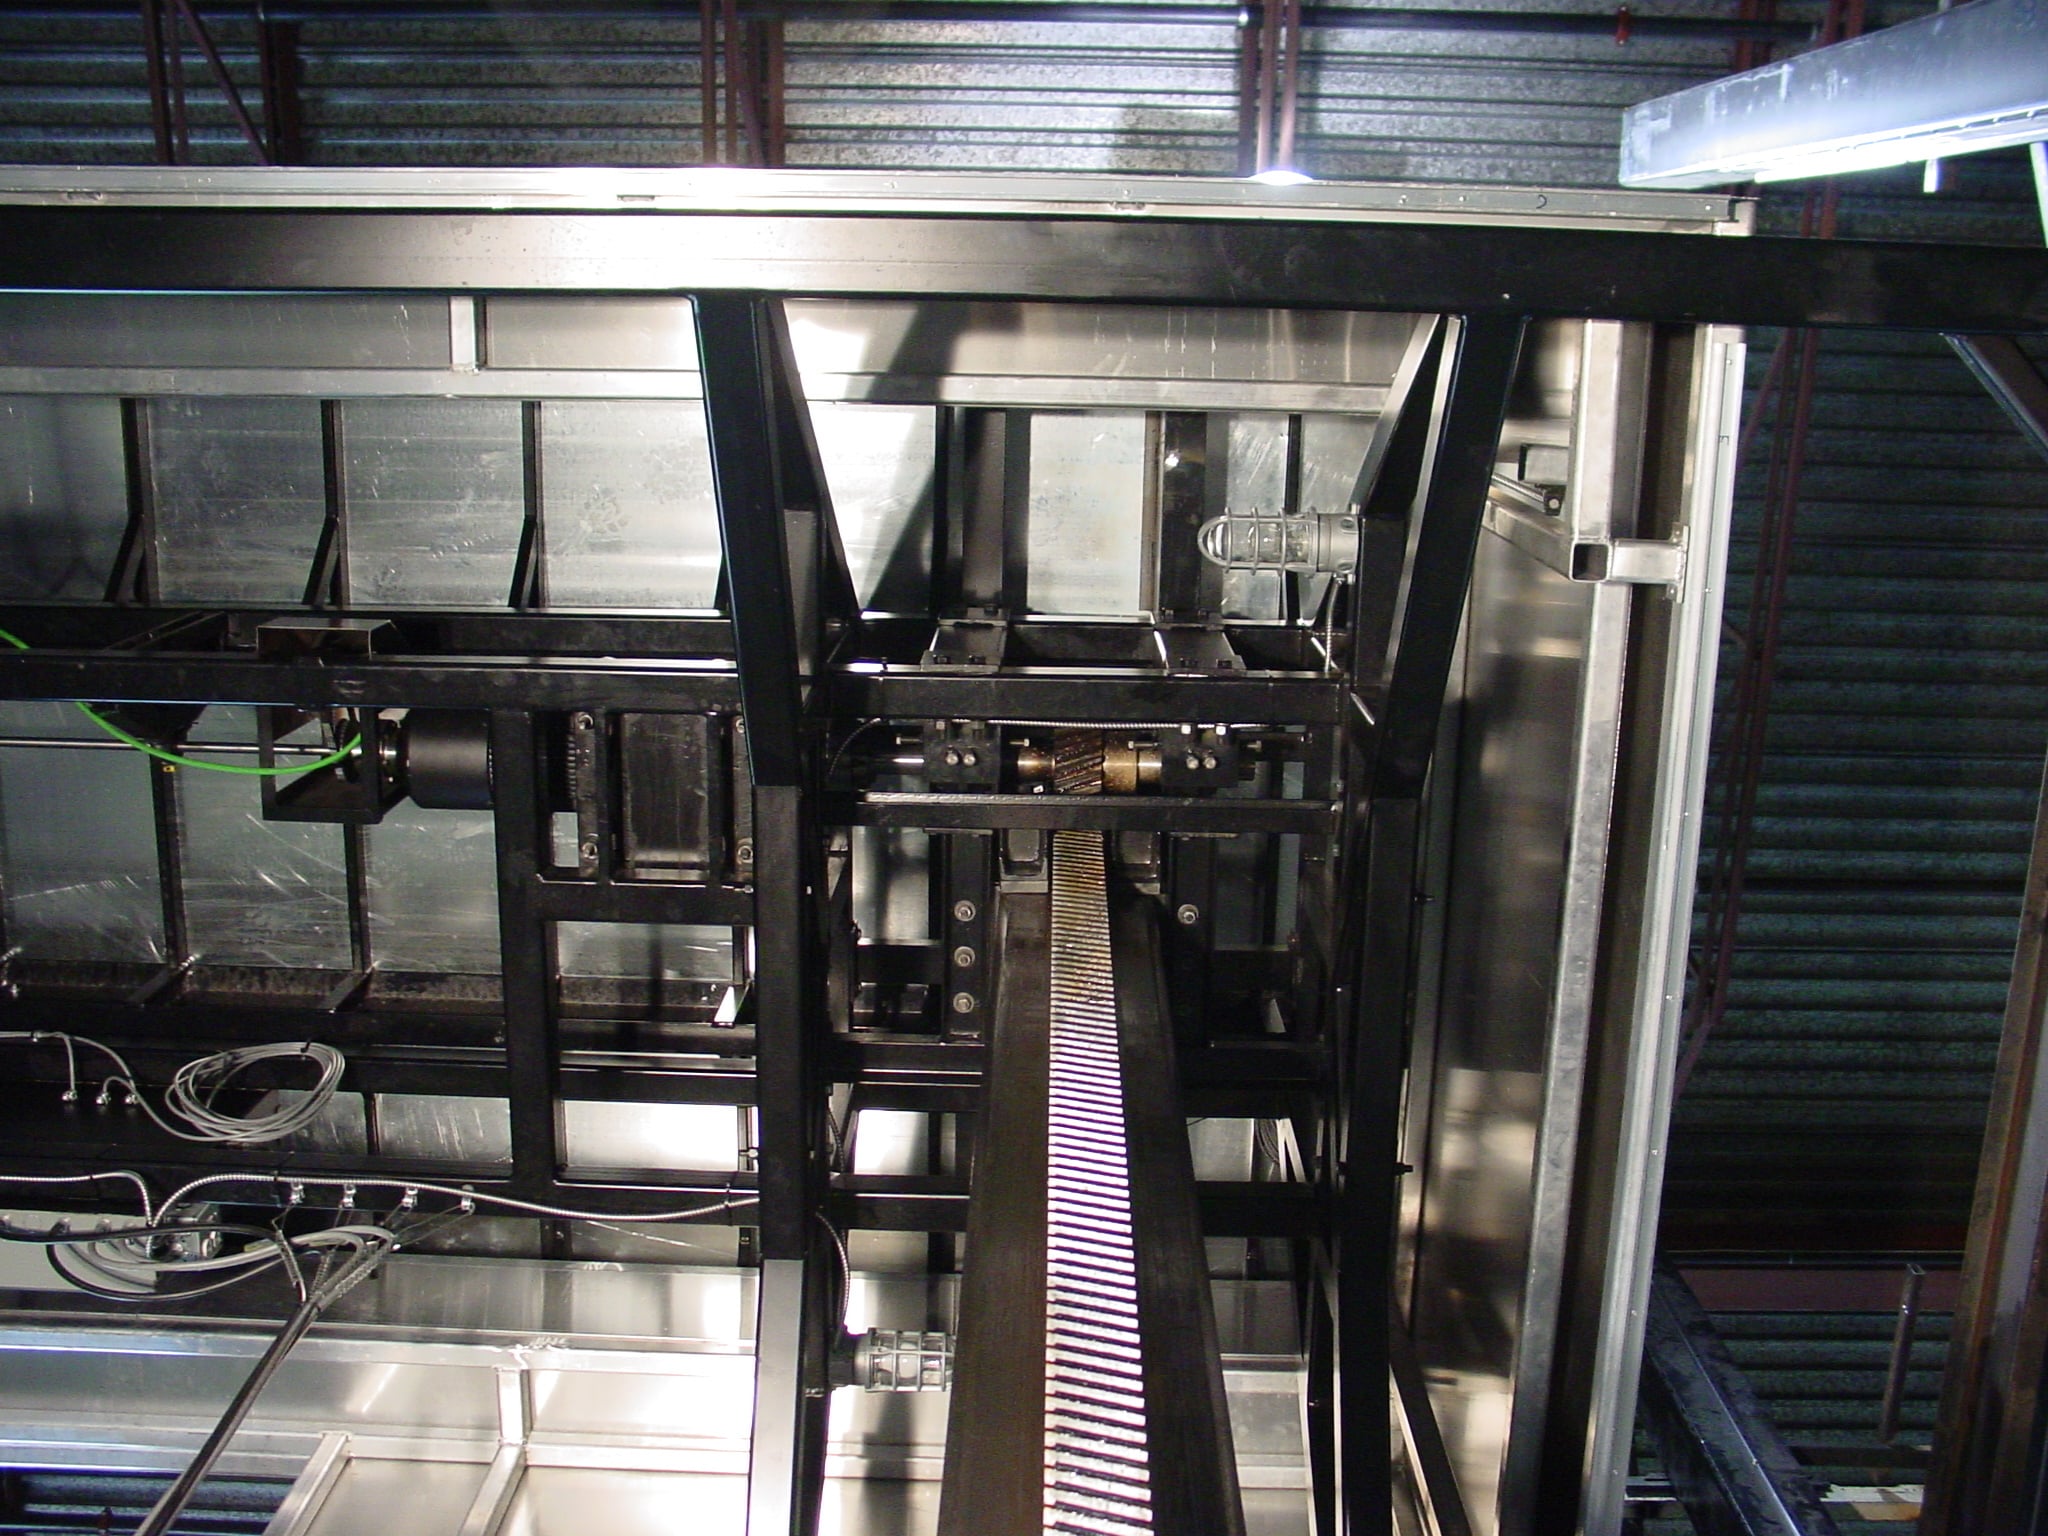 Stage lift rack and pignion